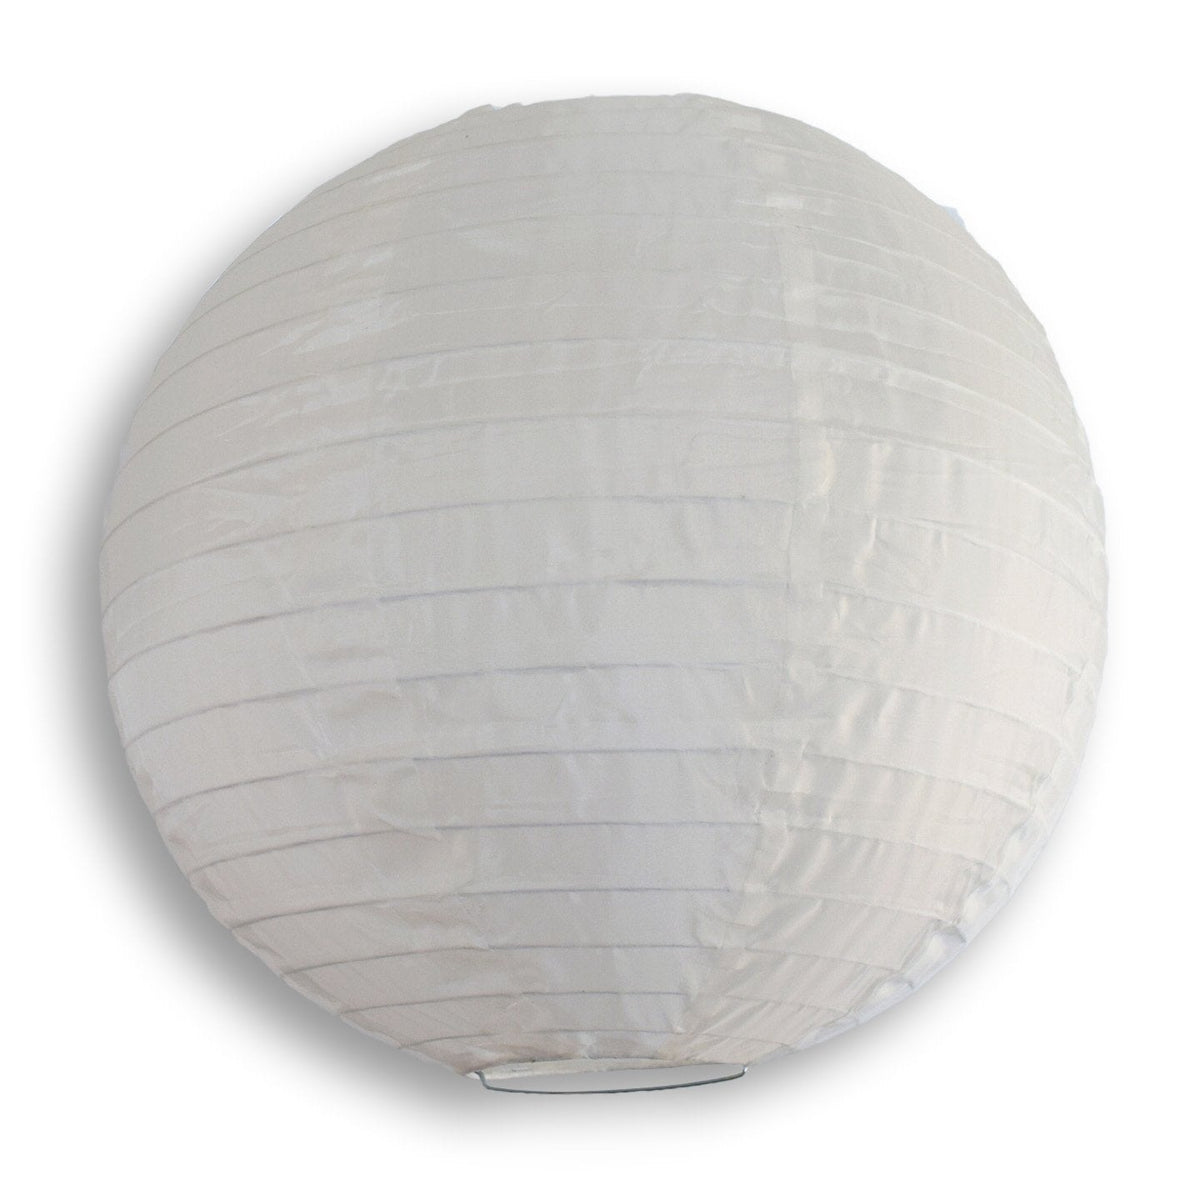 16" Shimmering Even Ribbing Nylon Lanterns - Door-2-Door - Various Colors Available (Master Case, 60-Day Processing)